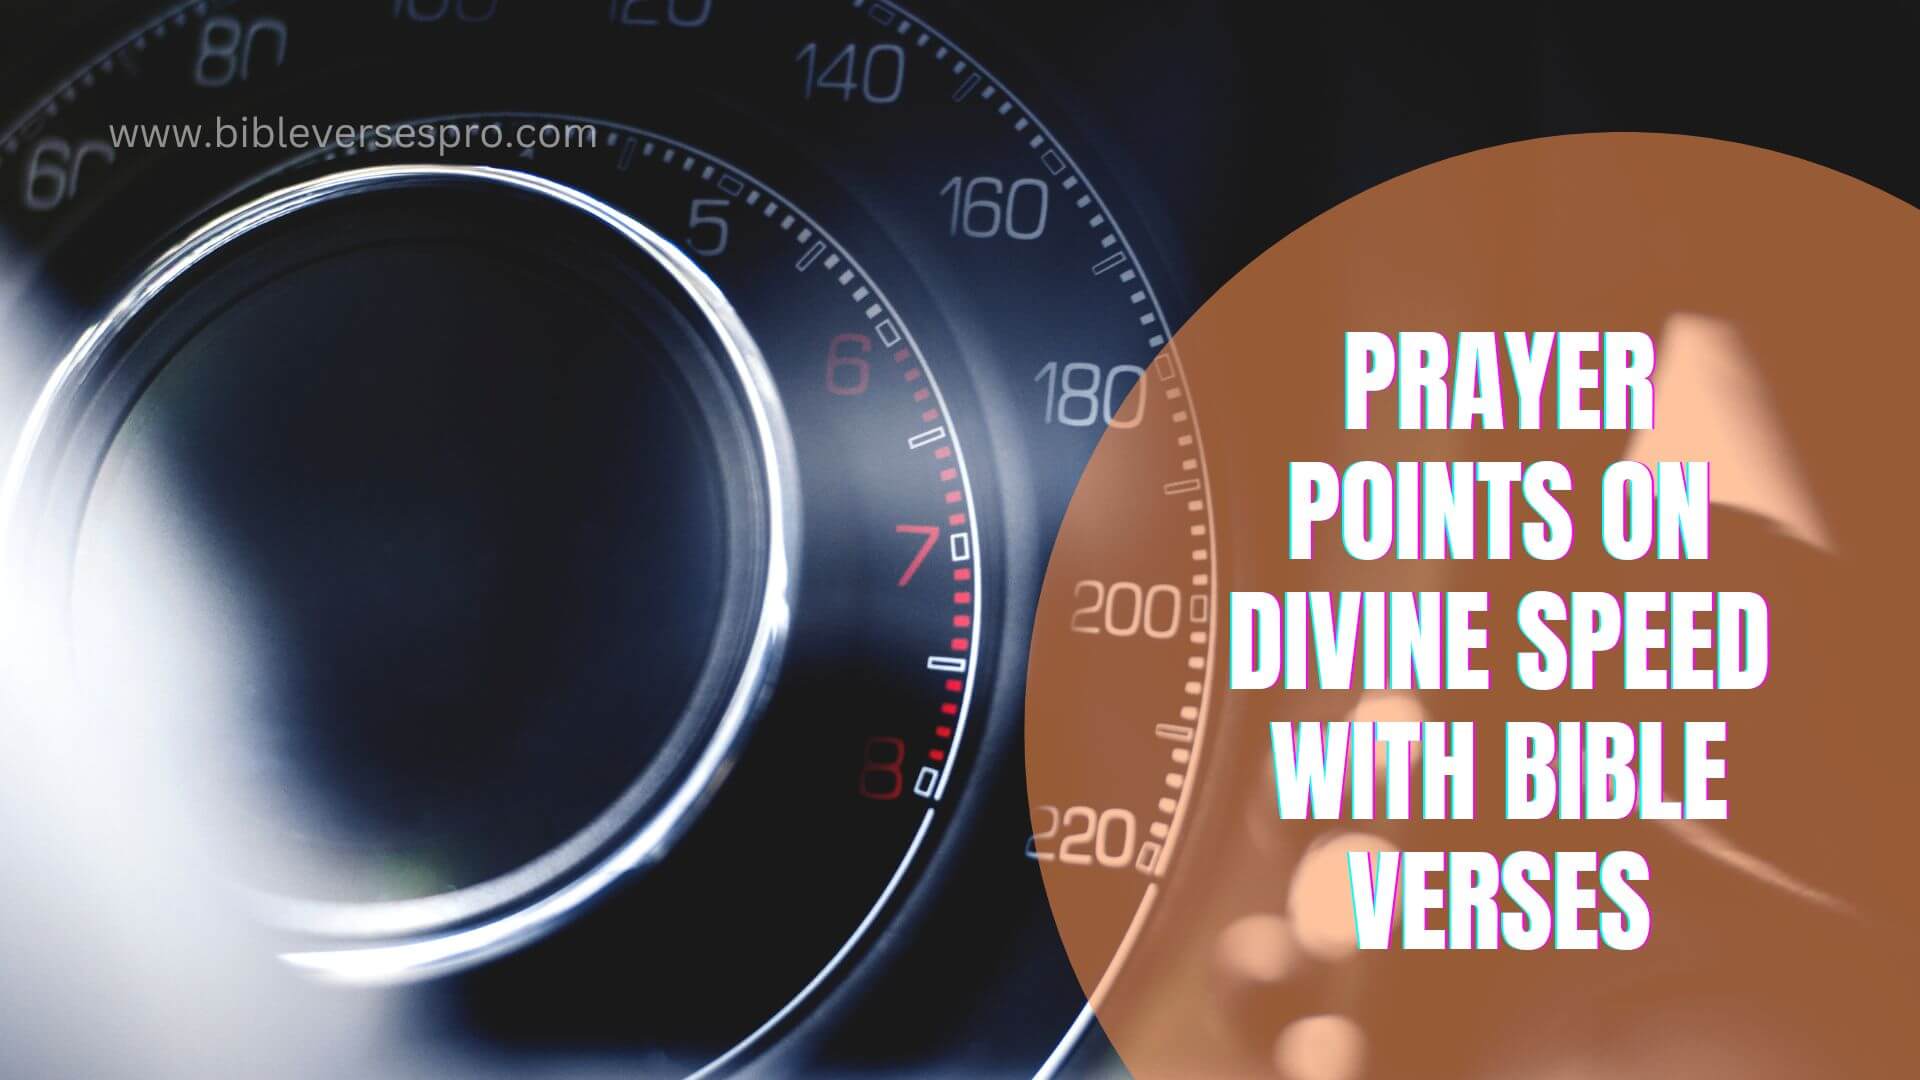 Prayer Points On Divine Speed With Bible Verses